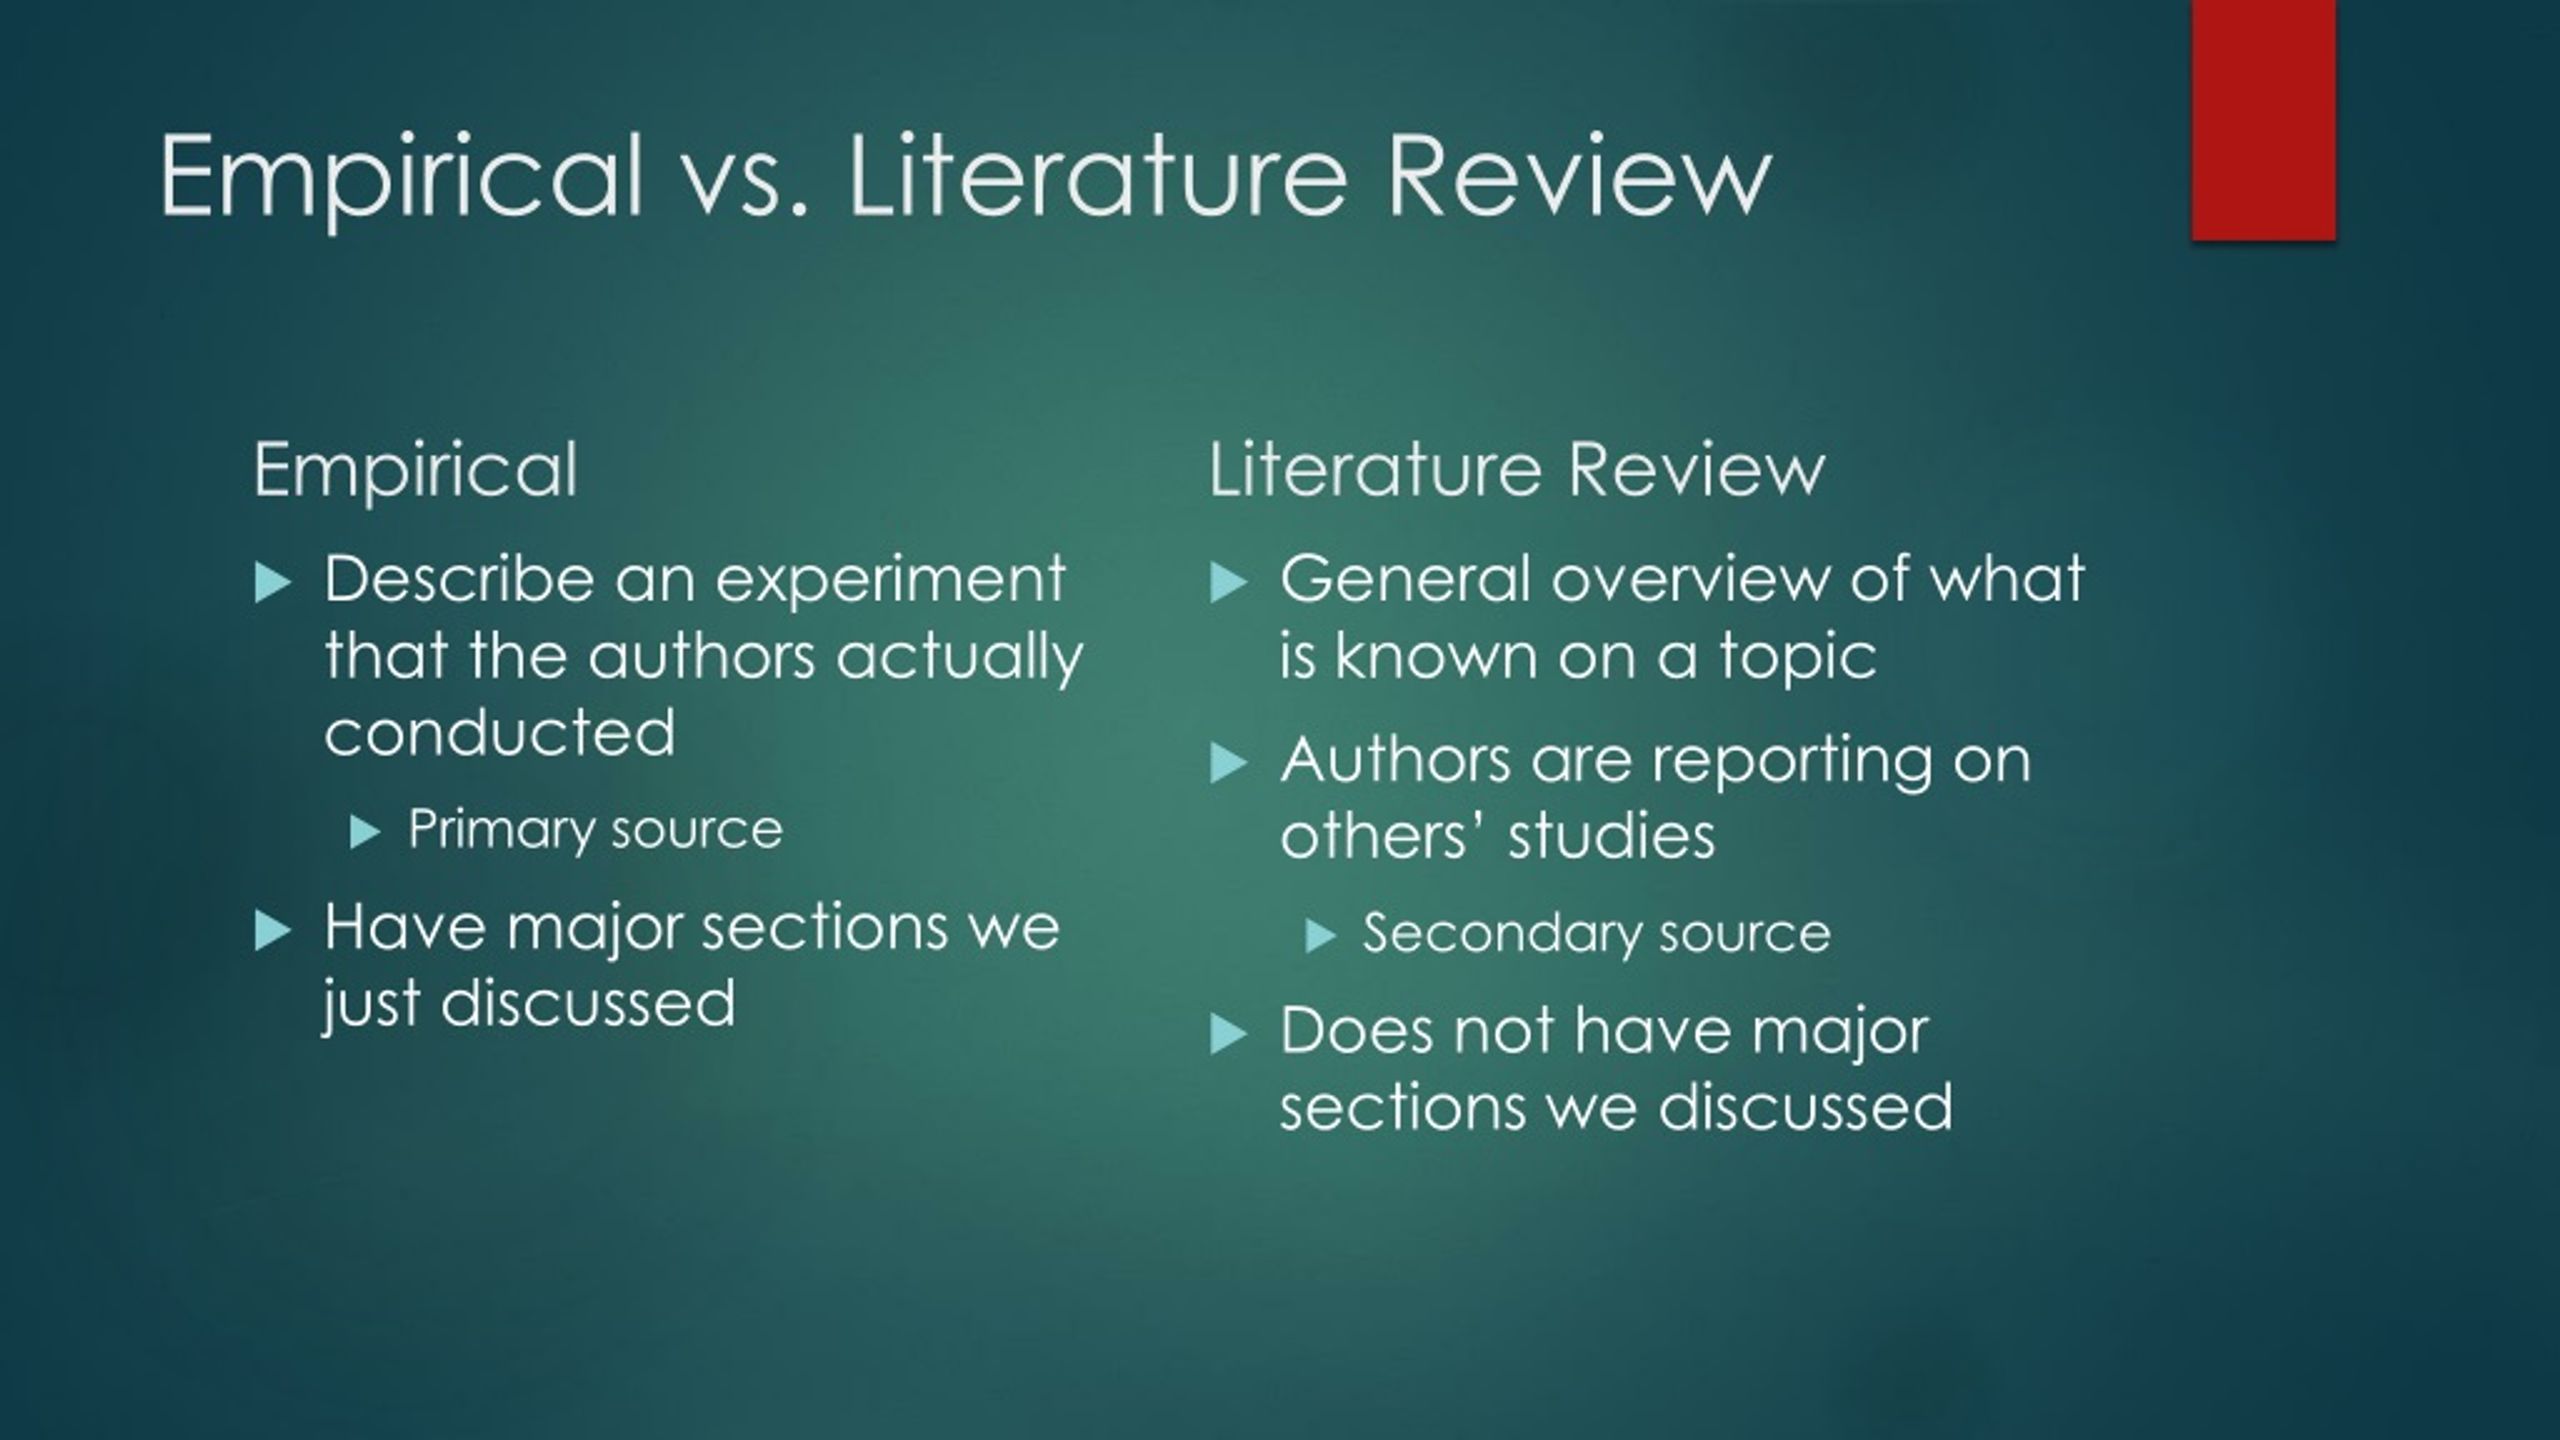 theoretical literature review and empirical literature review